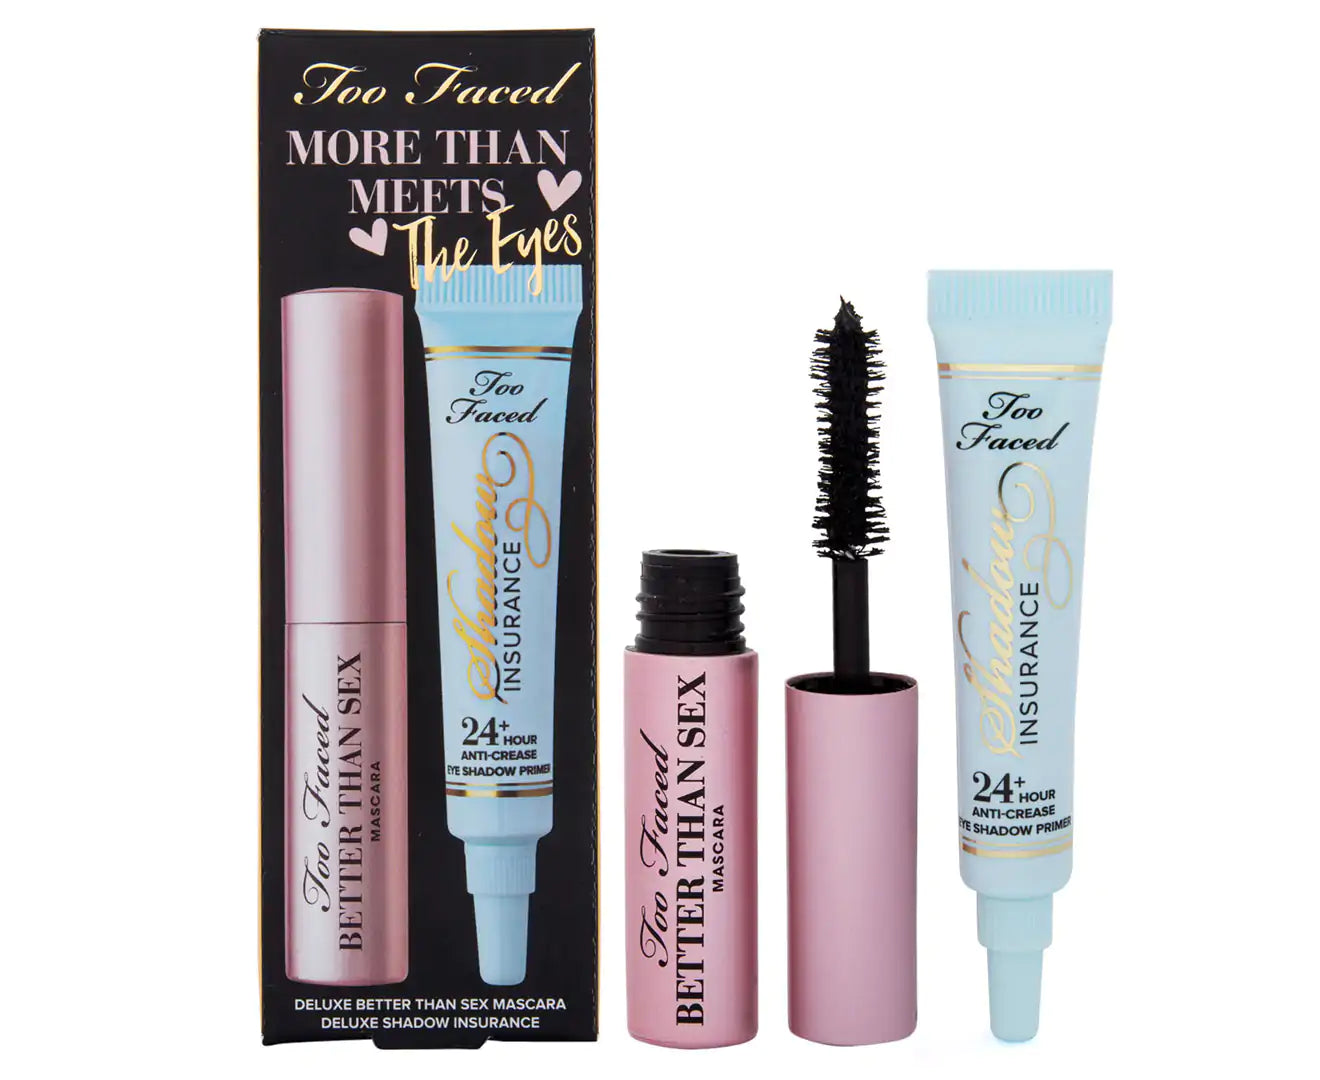 Too Faced More Than Meets The Eyes Set